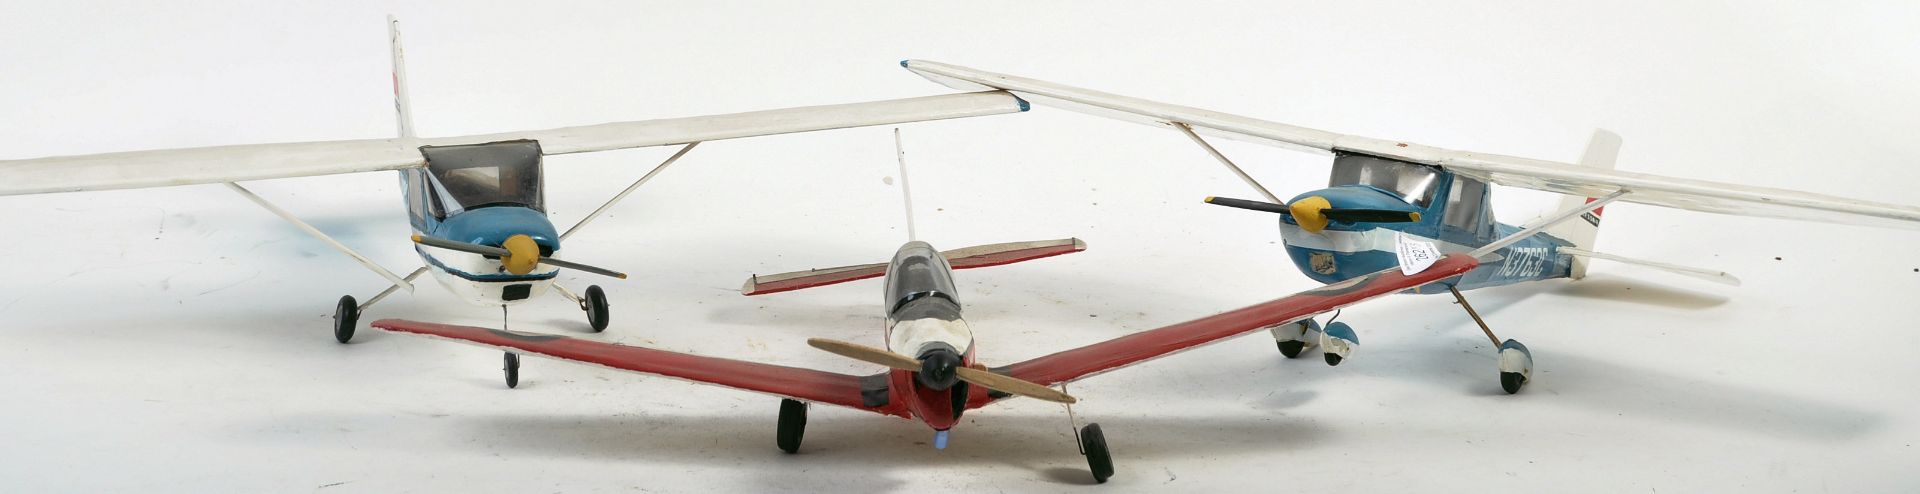 COLLECTION OF X3 LIGHT AIRCRAFT MODEL PLANES